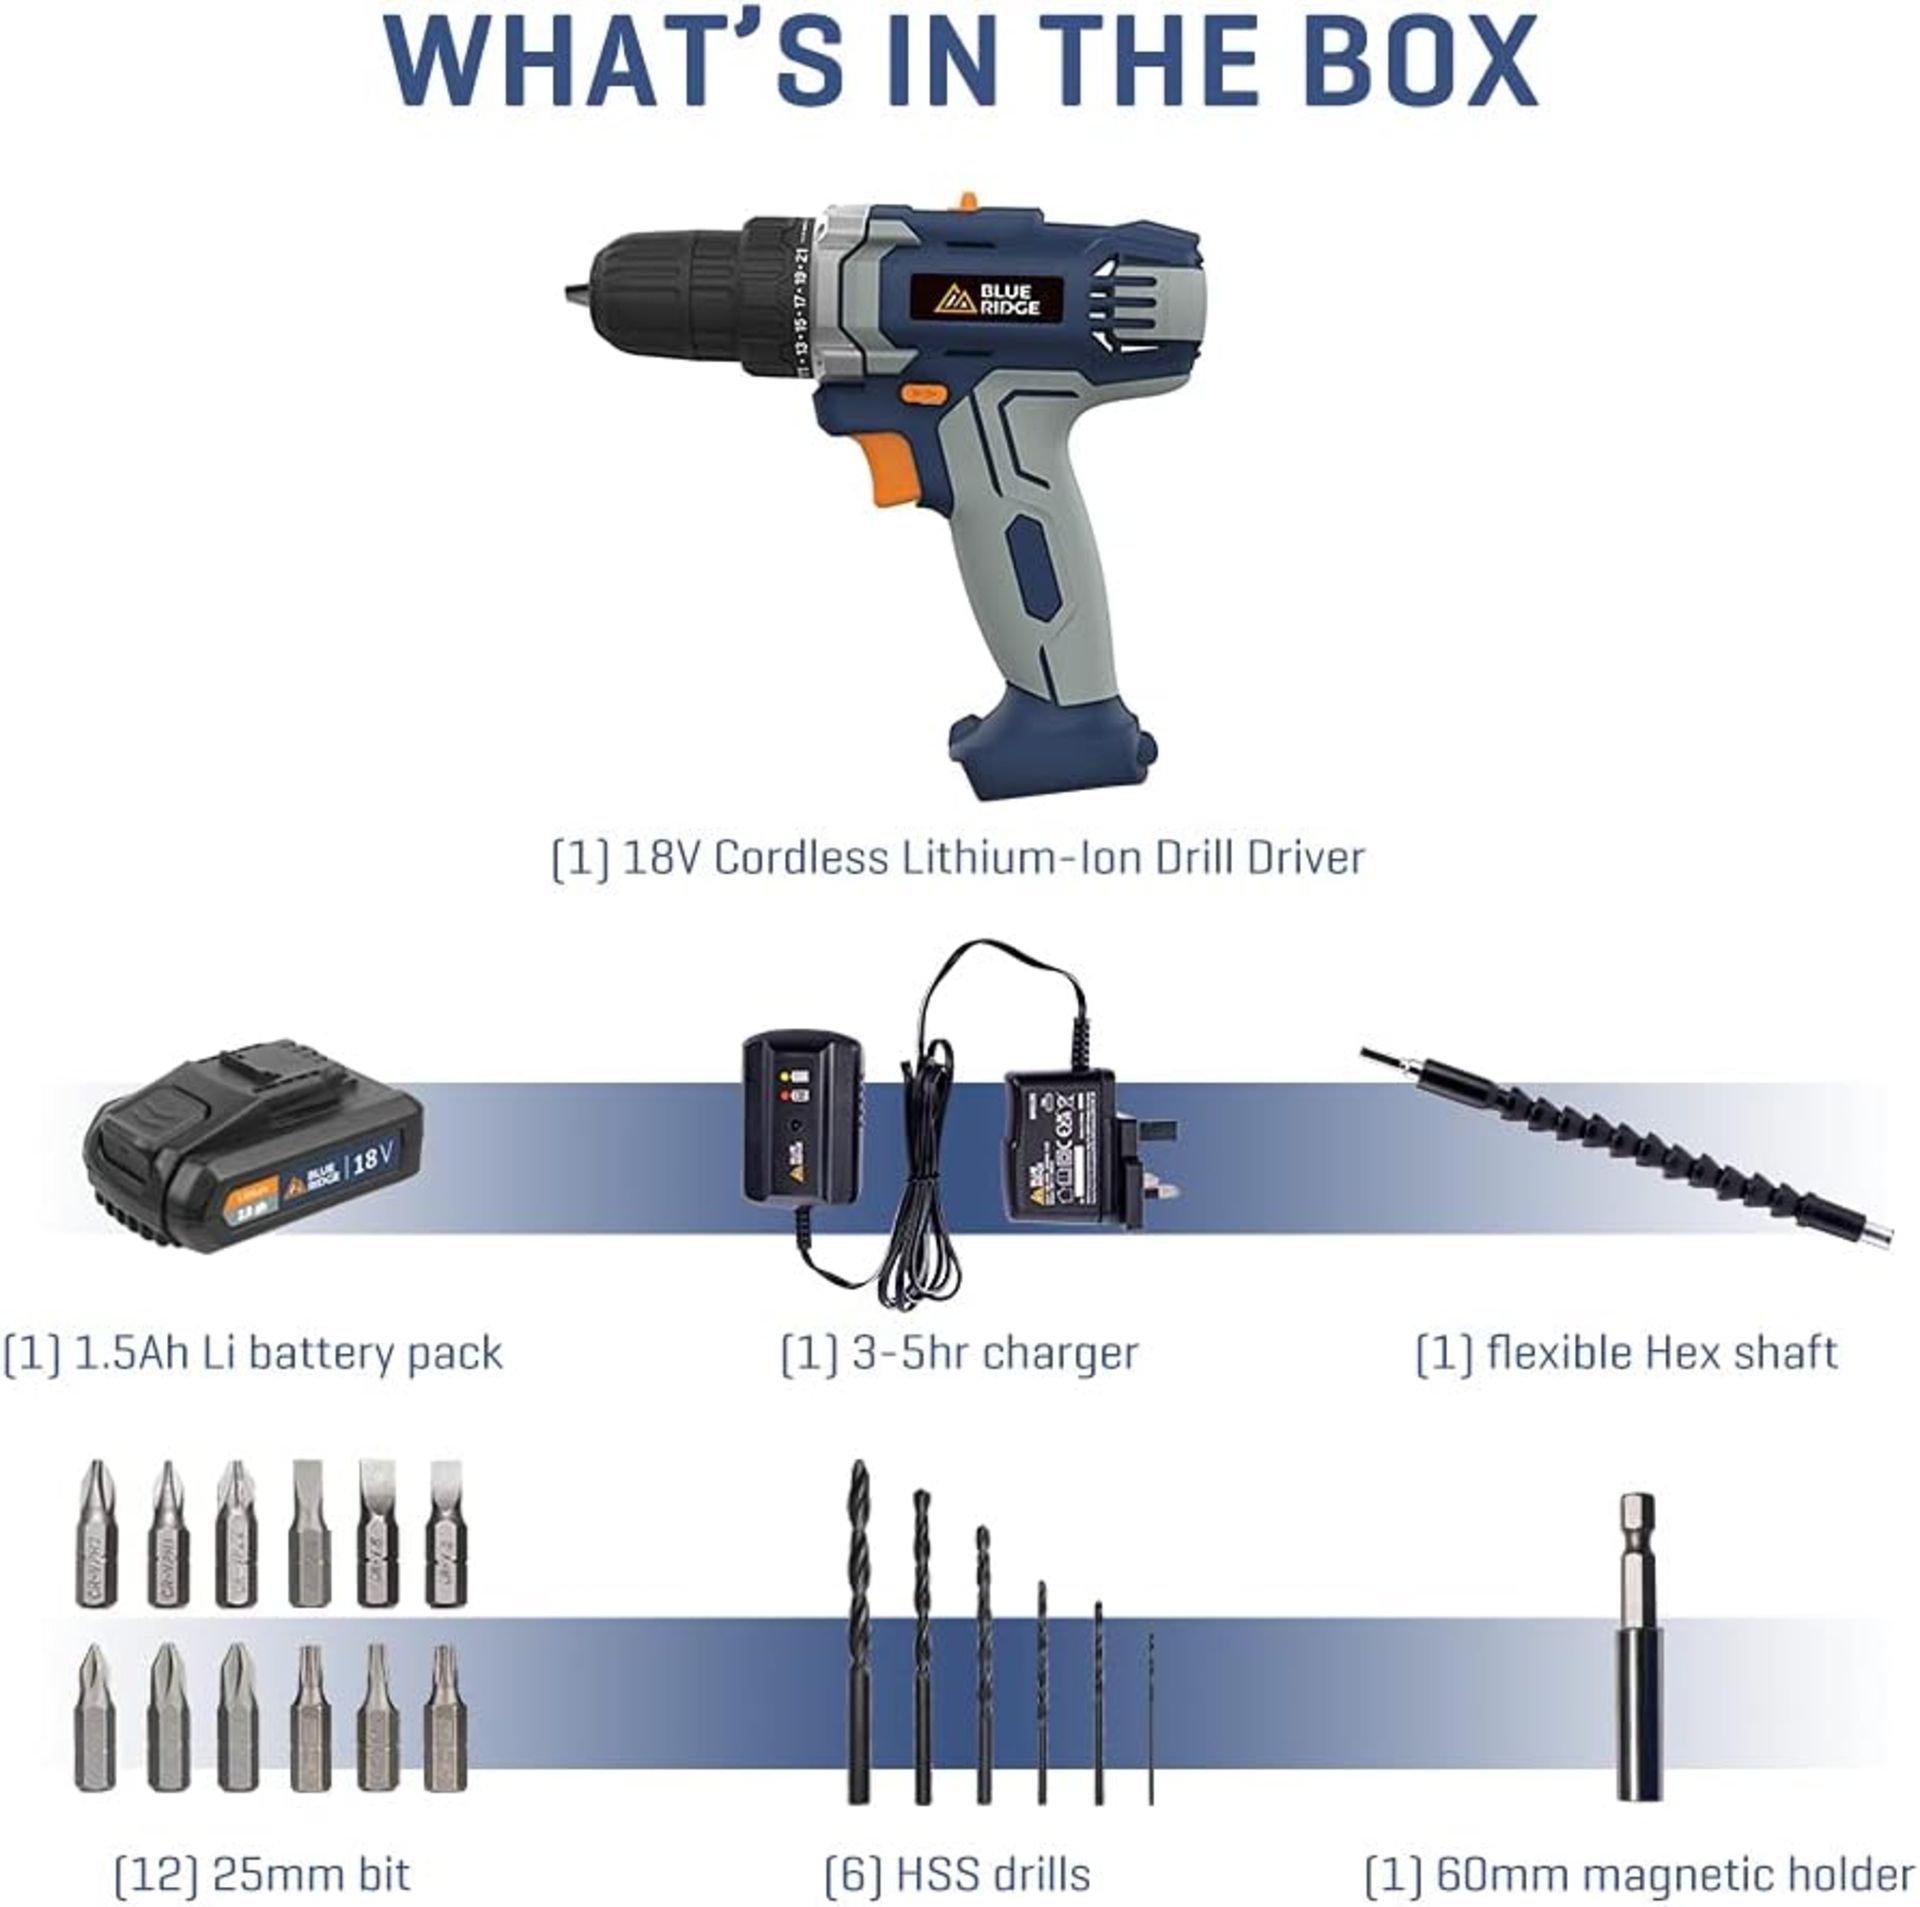 TRADE OT TO CONTAIN 20x NEW & BOXED BLUE RIDGE 18V Cordless Drill Driver. RRP £89 EACH. The - Image 5 of 5